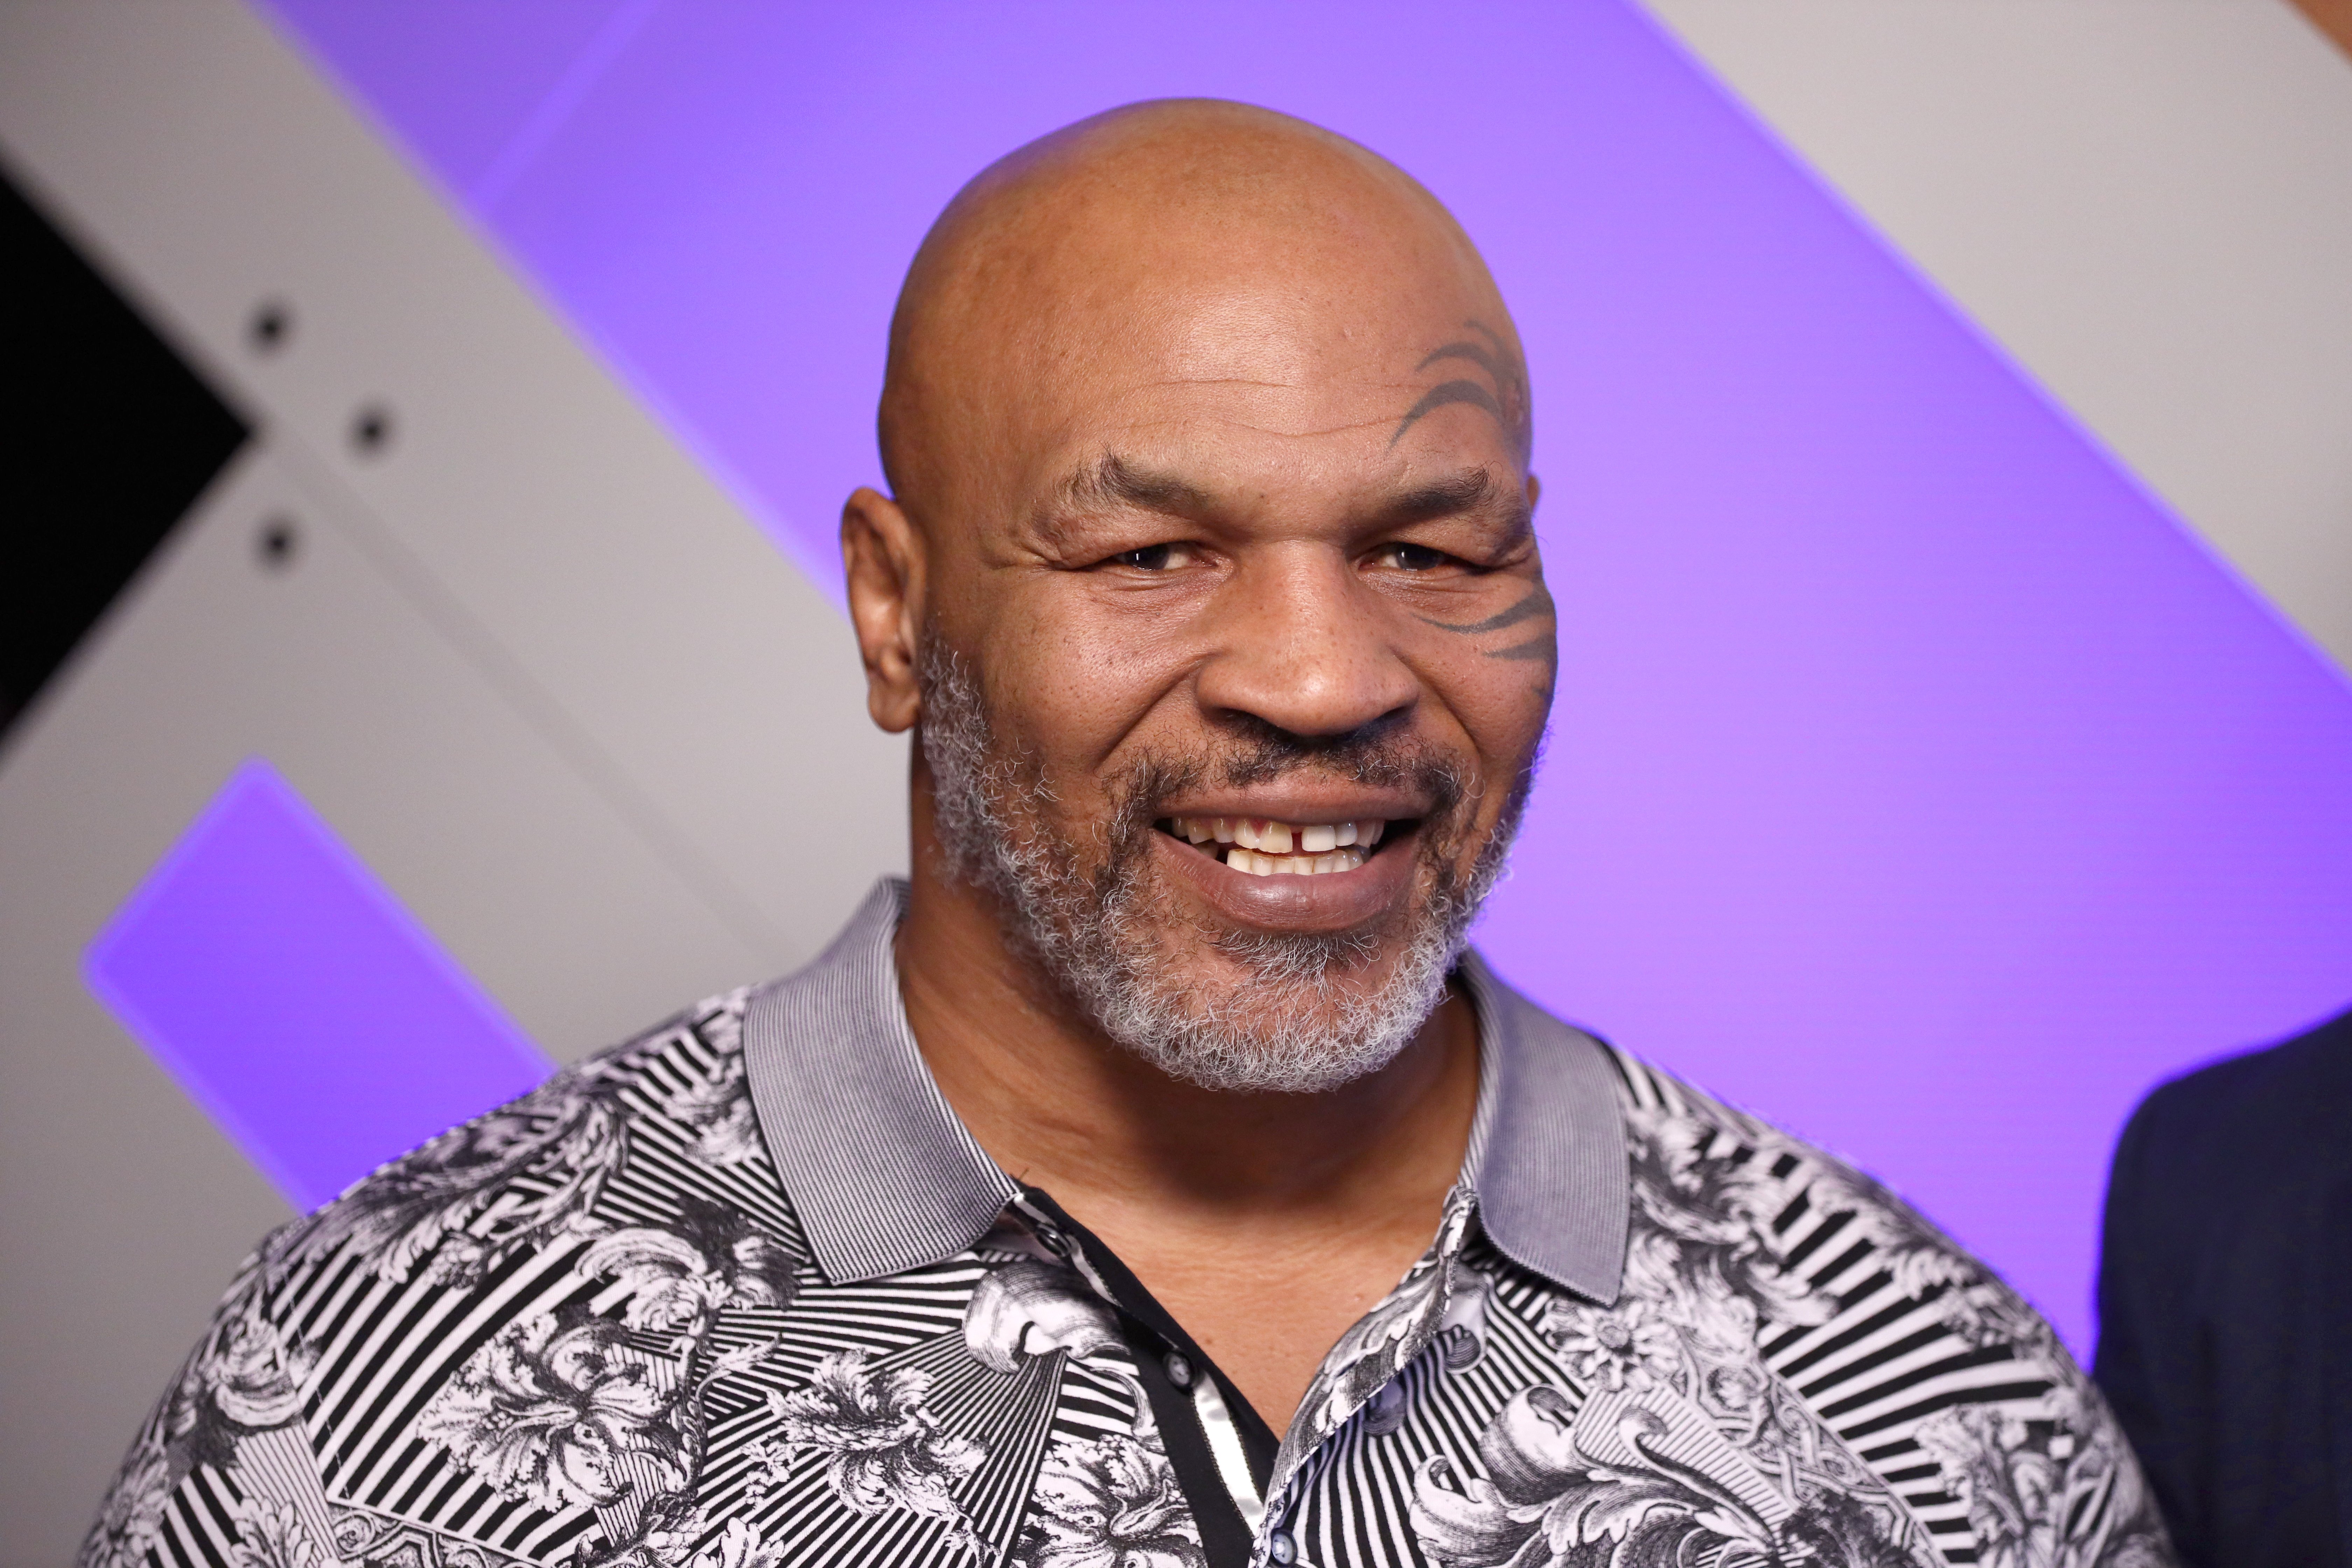 Mike Tyson speaks with Mario Lopez at Capital One Podcast Studio during the 2019 iHeartRadio Podcast Awards Presented by Capital One at the iHeartRadio Theater LA on January 18, 2019, in Burbank, California. | Source: Getty Images.